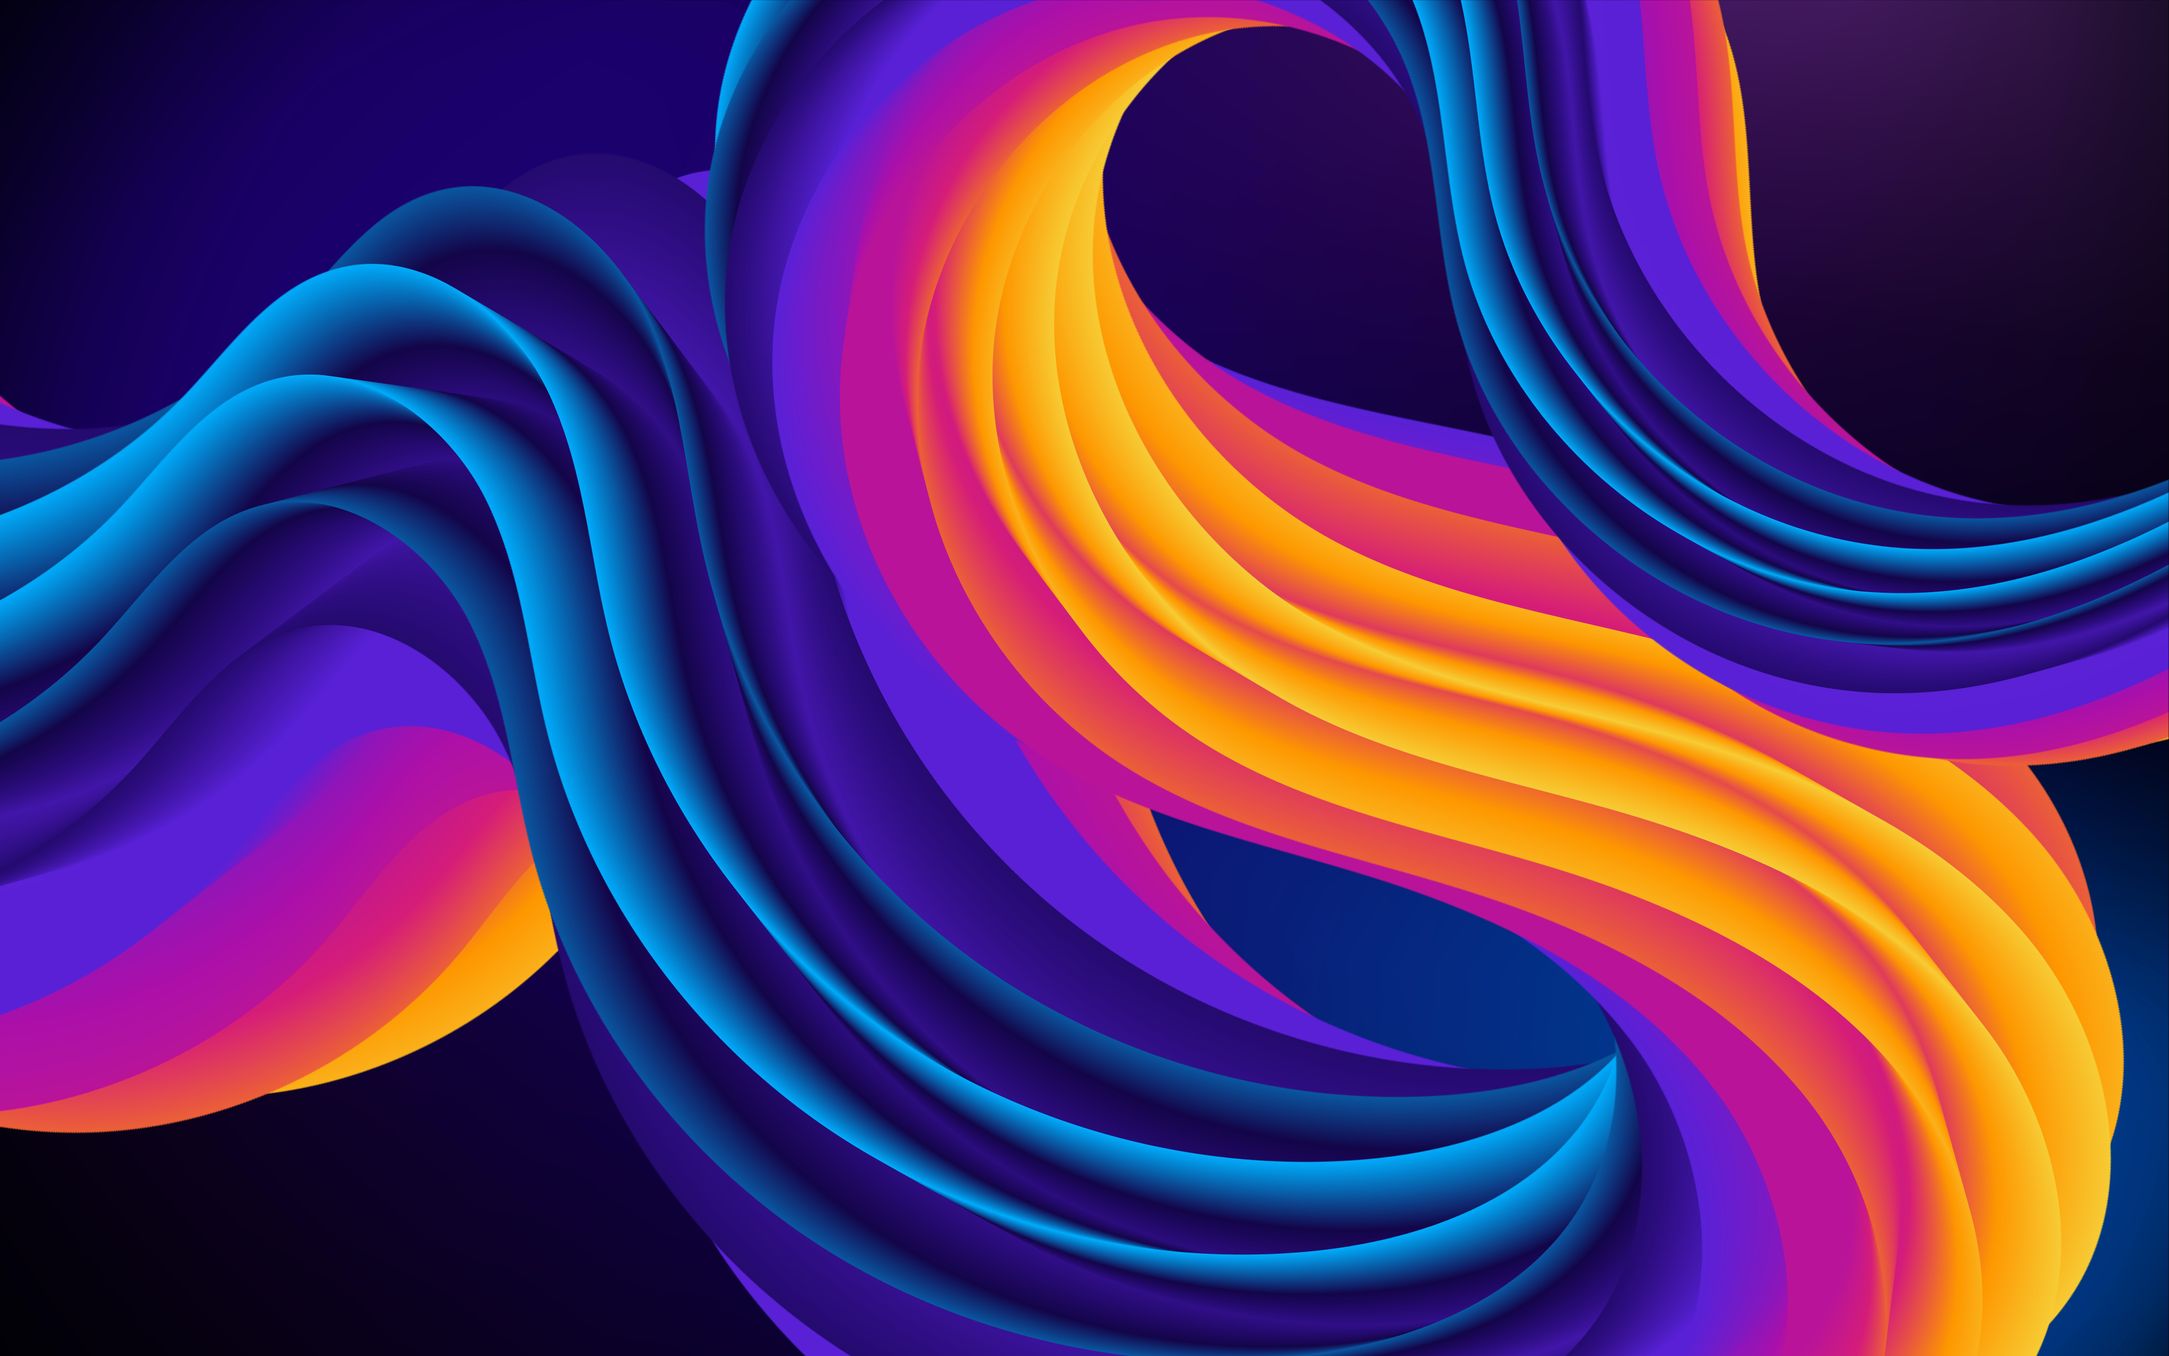 An abstract image of colourful swirls by BoliviaInteligente on Unsplash